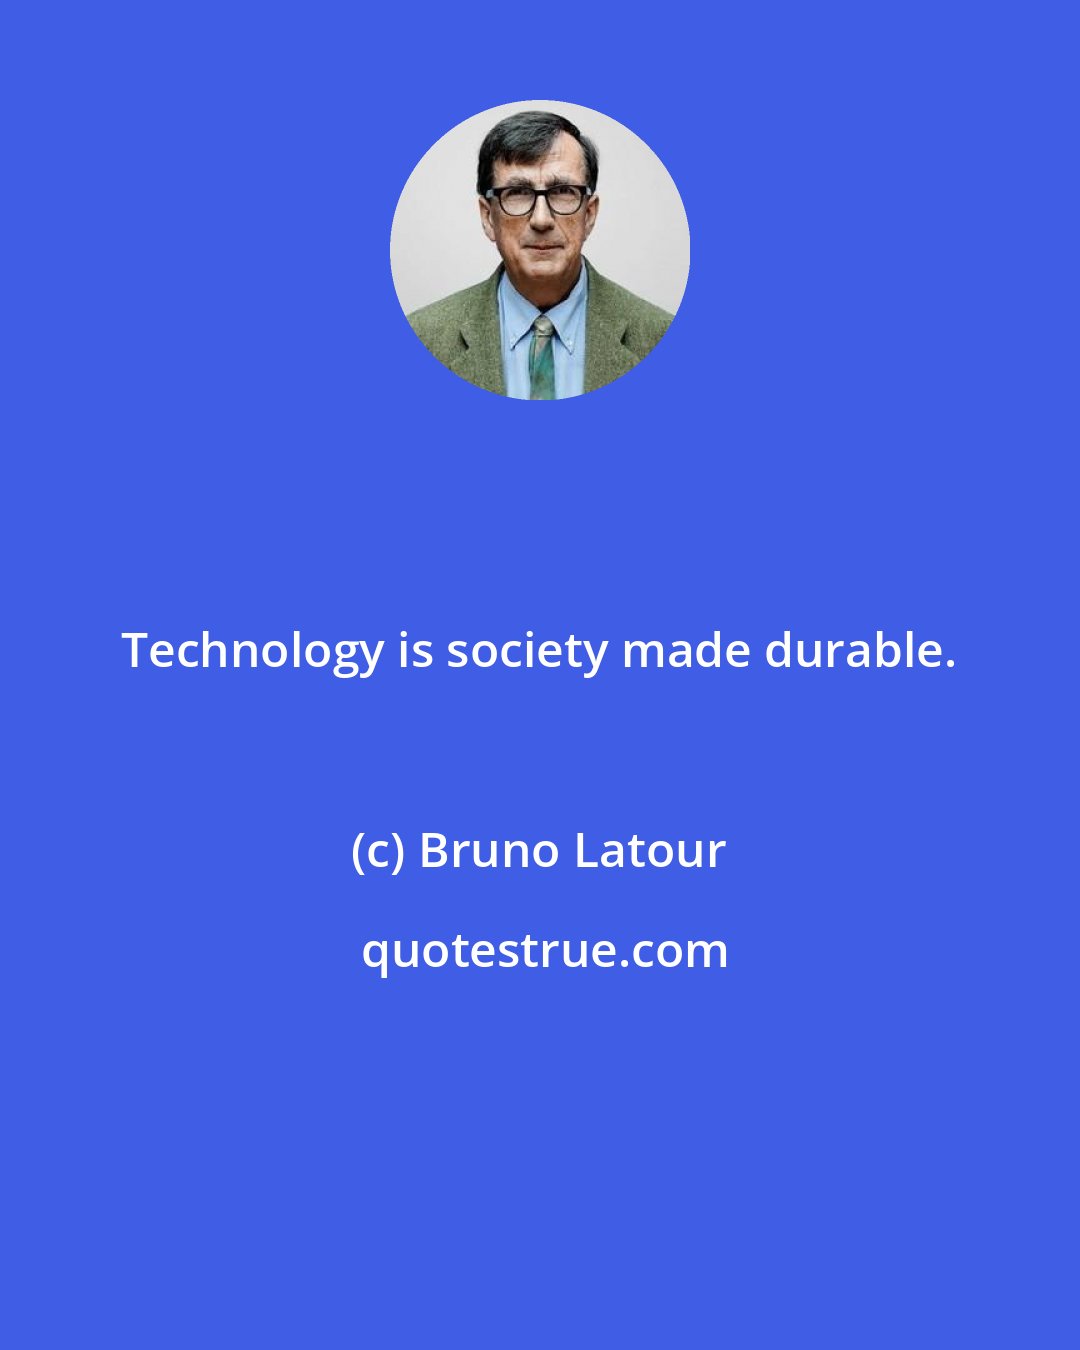 Bruno Latour: Technology is society made durable.